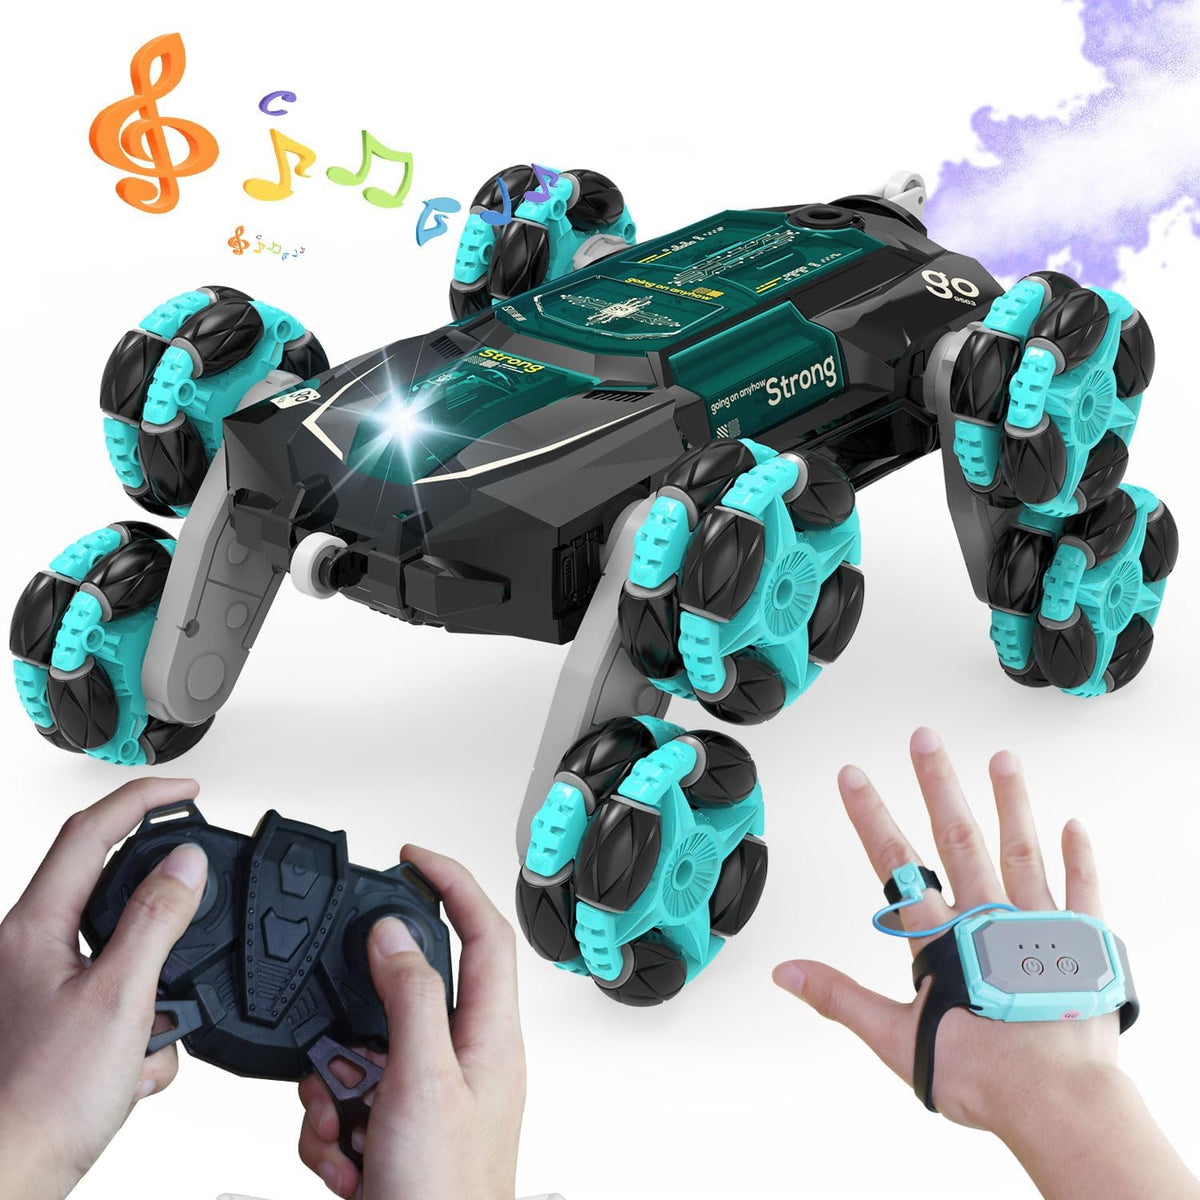 8Wd Gesture Sensing Rc Car Toys for Boy Age 8-13,2.4Ghz Remote Control Car,Racing Drift Double-Sided Stunt Car